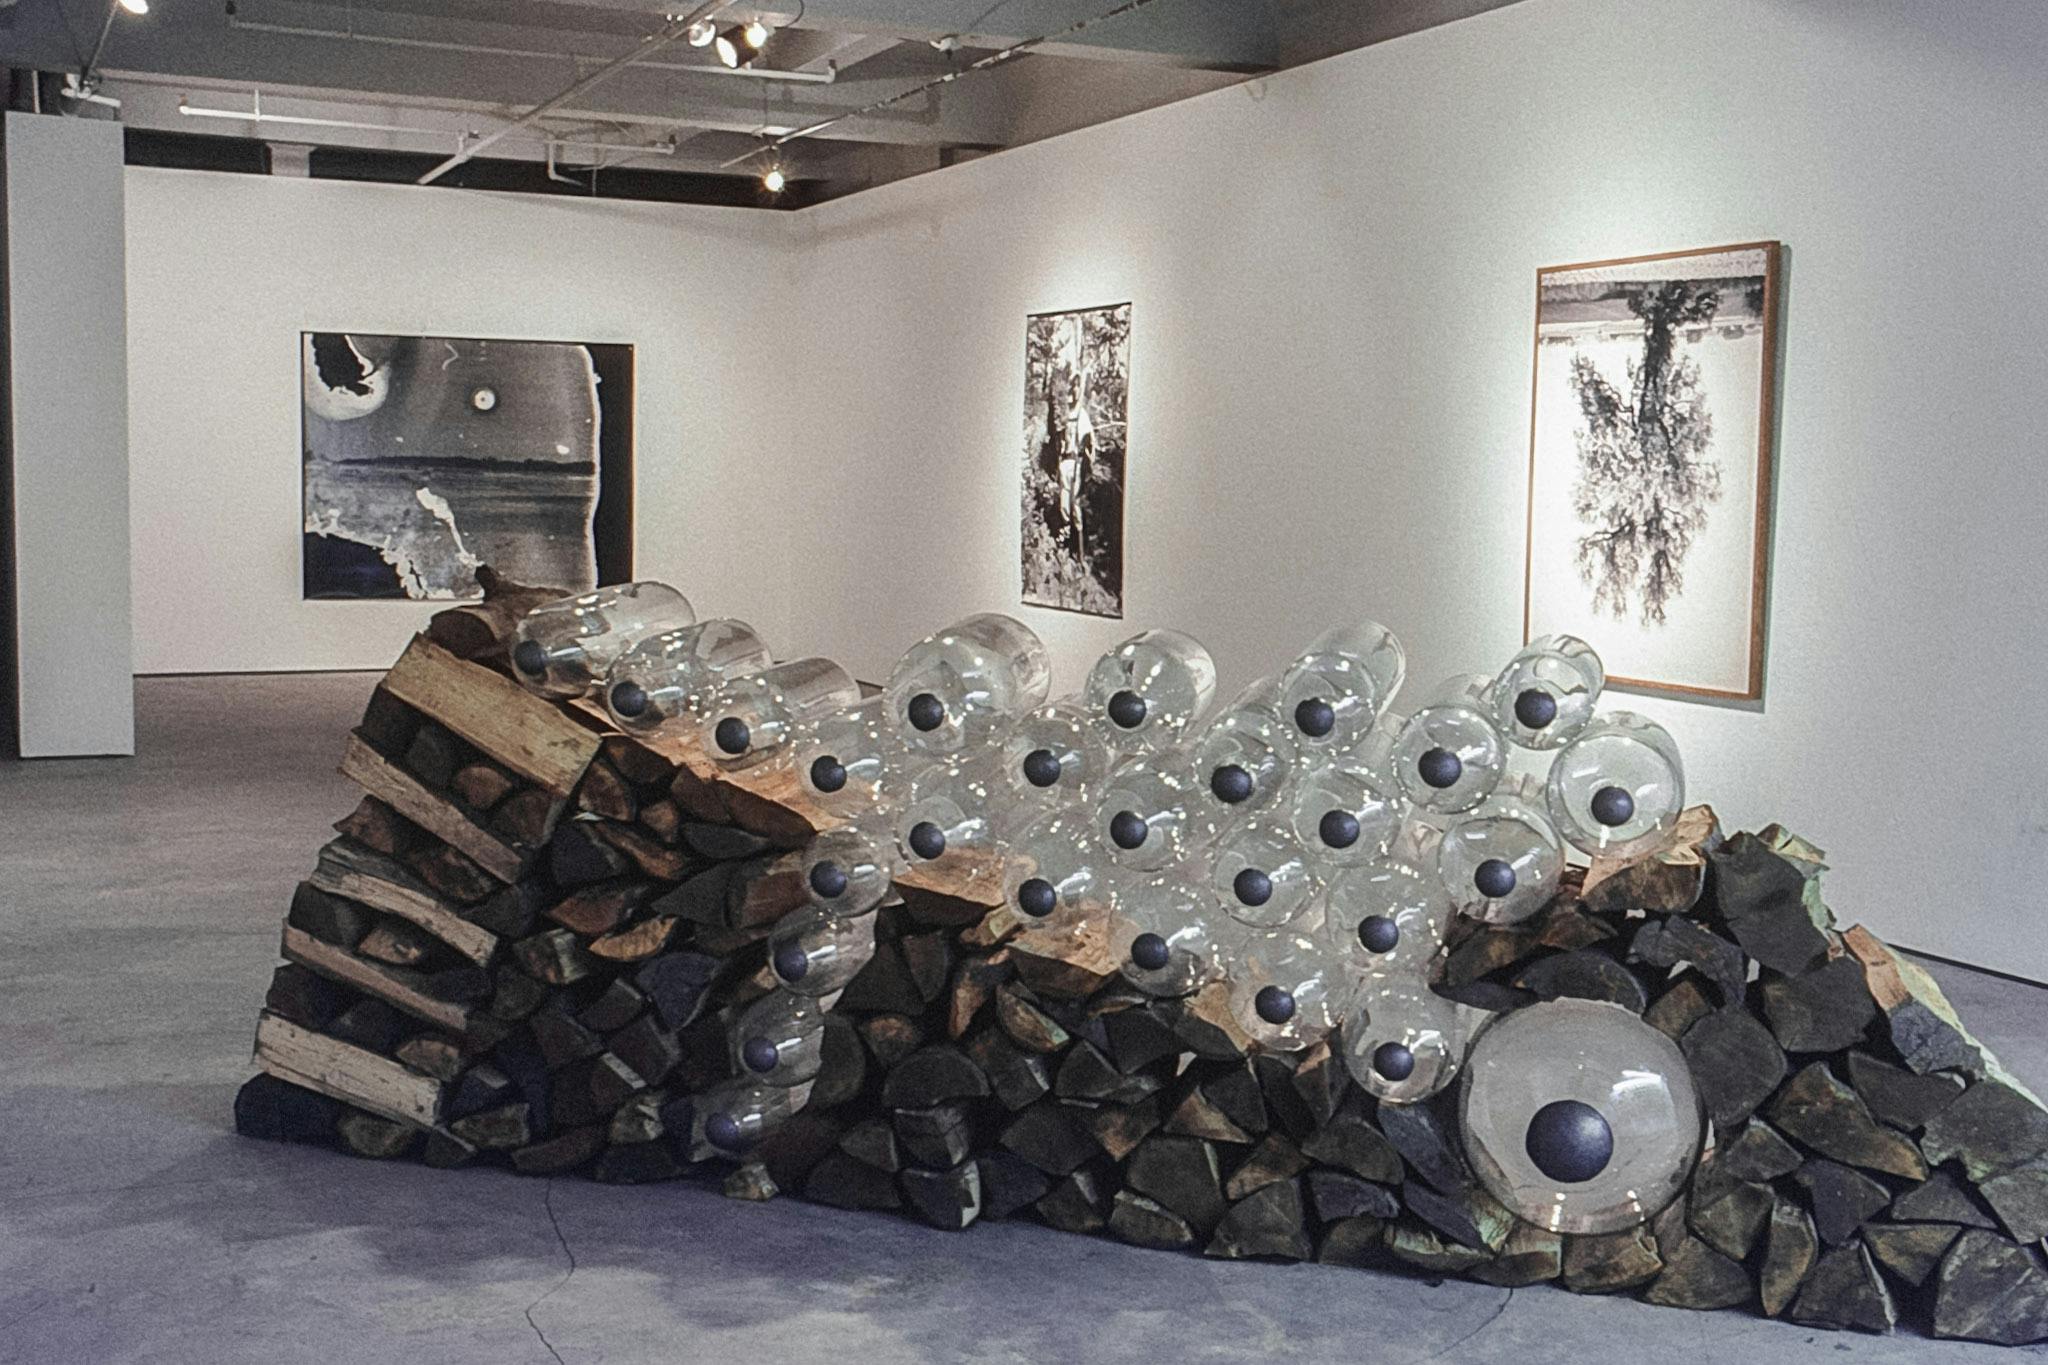 A closeup image of a large artwork. The work is made of large glass cylinders of different sizes and firewood. In the background, three large black and white photos can be seen on the walls.